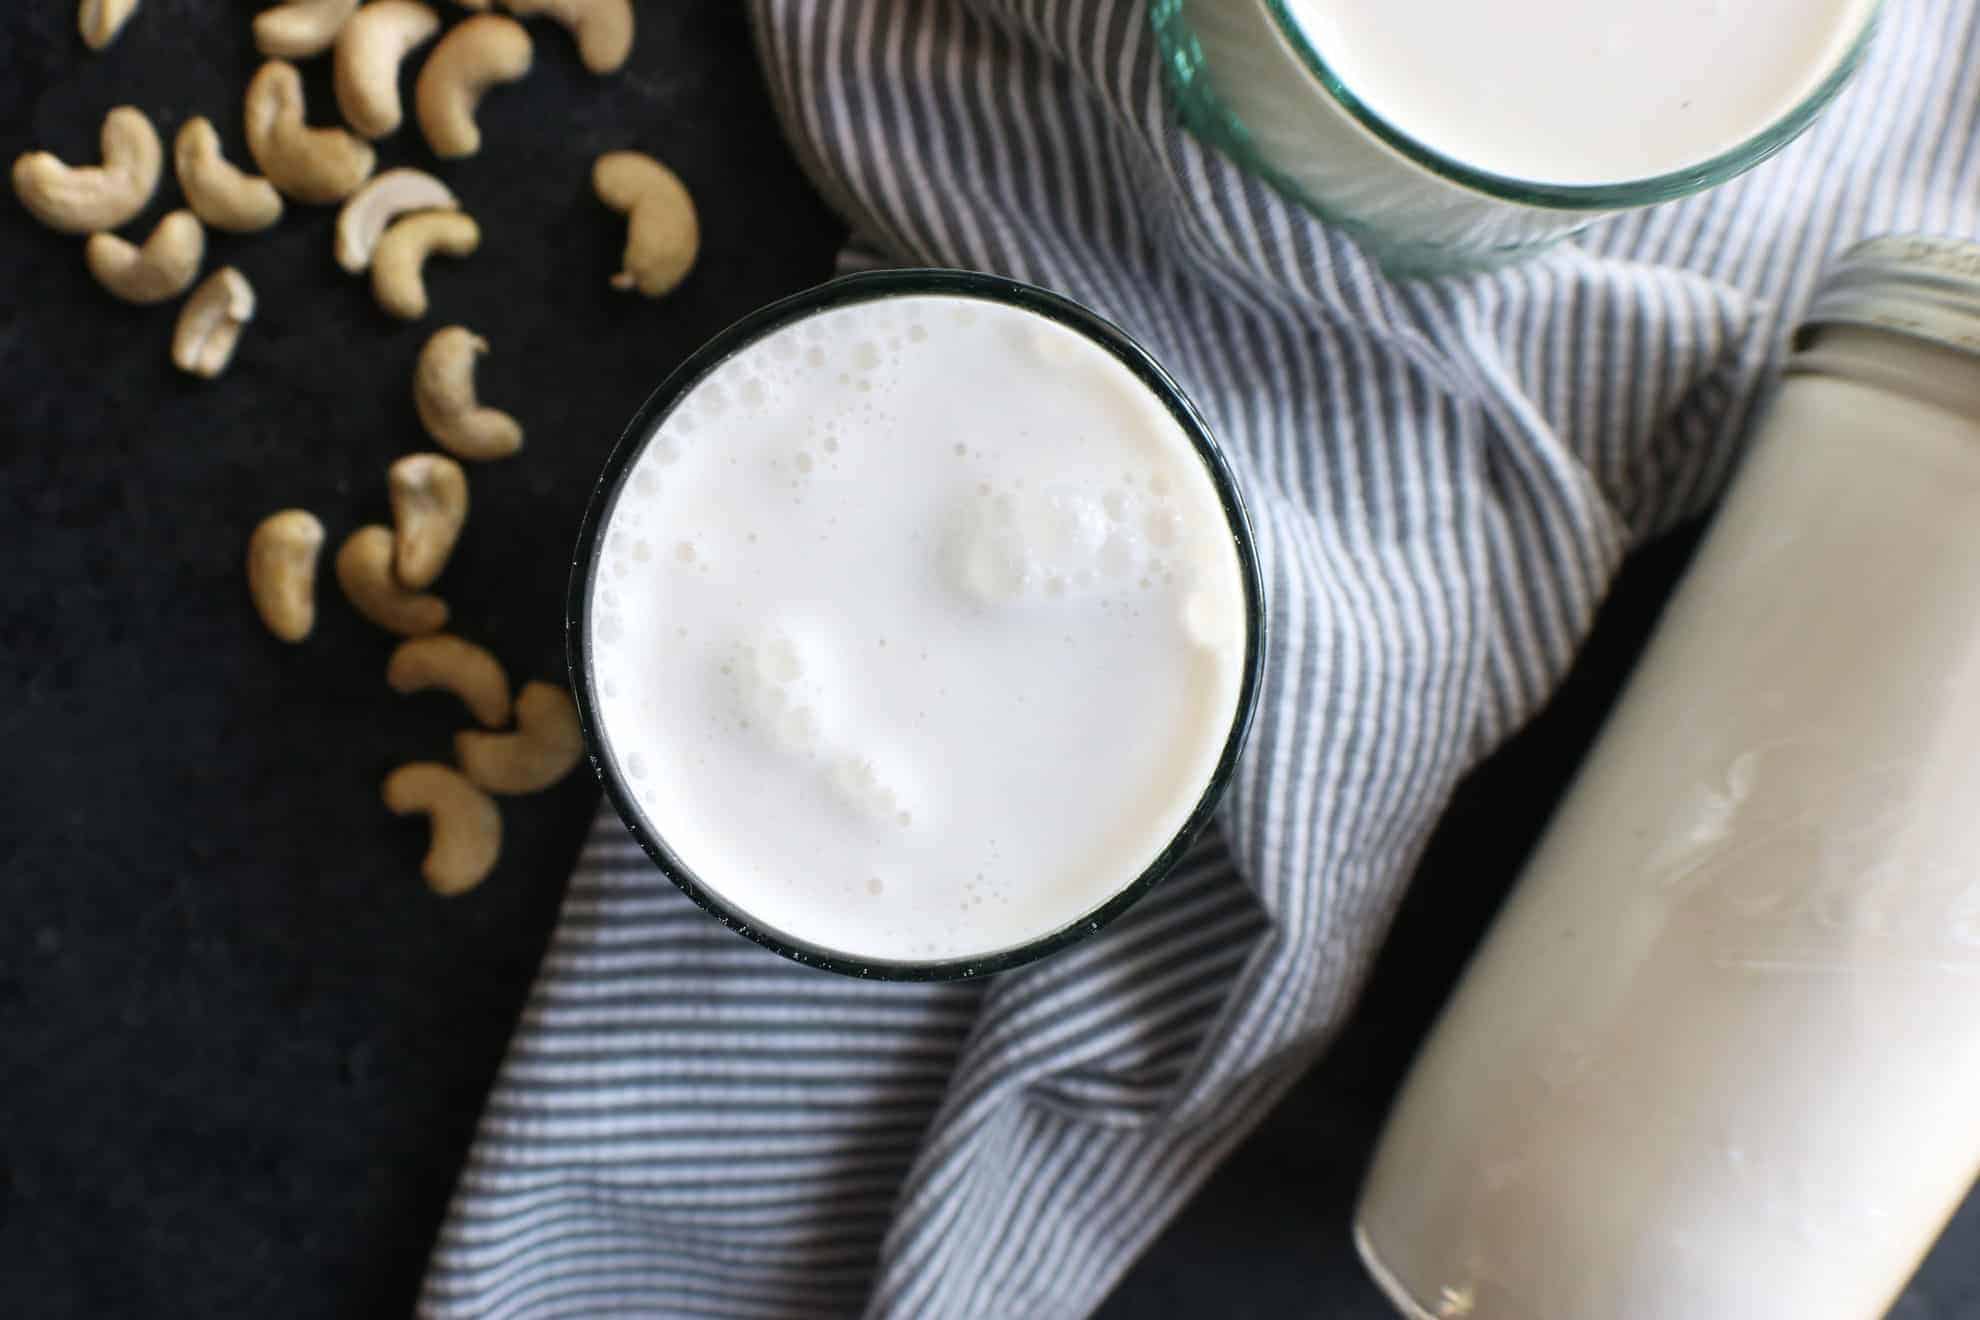 This is an overhead image of a glass filled with milk. The glass sits on a grey pinstripe tea towel on a dark grey surface. Cashews are scattered around the glass. A mason jar filled with milk is off to the bottom right of the image.